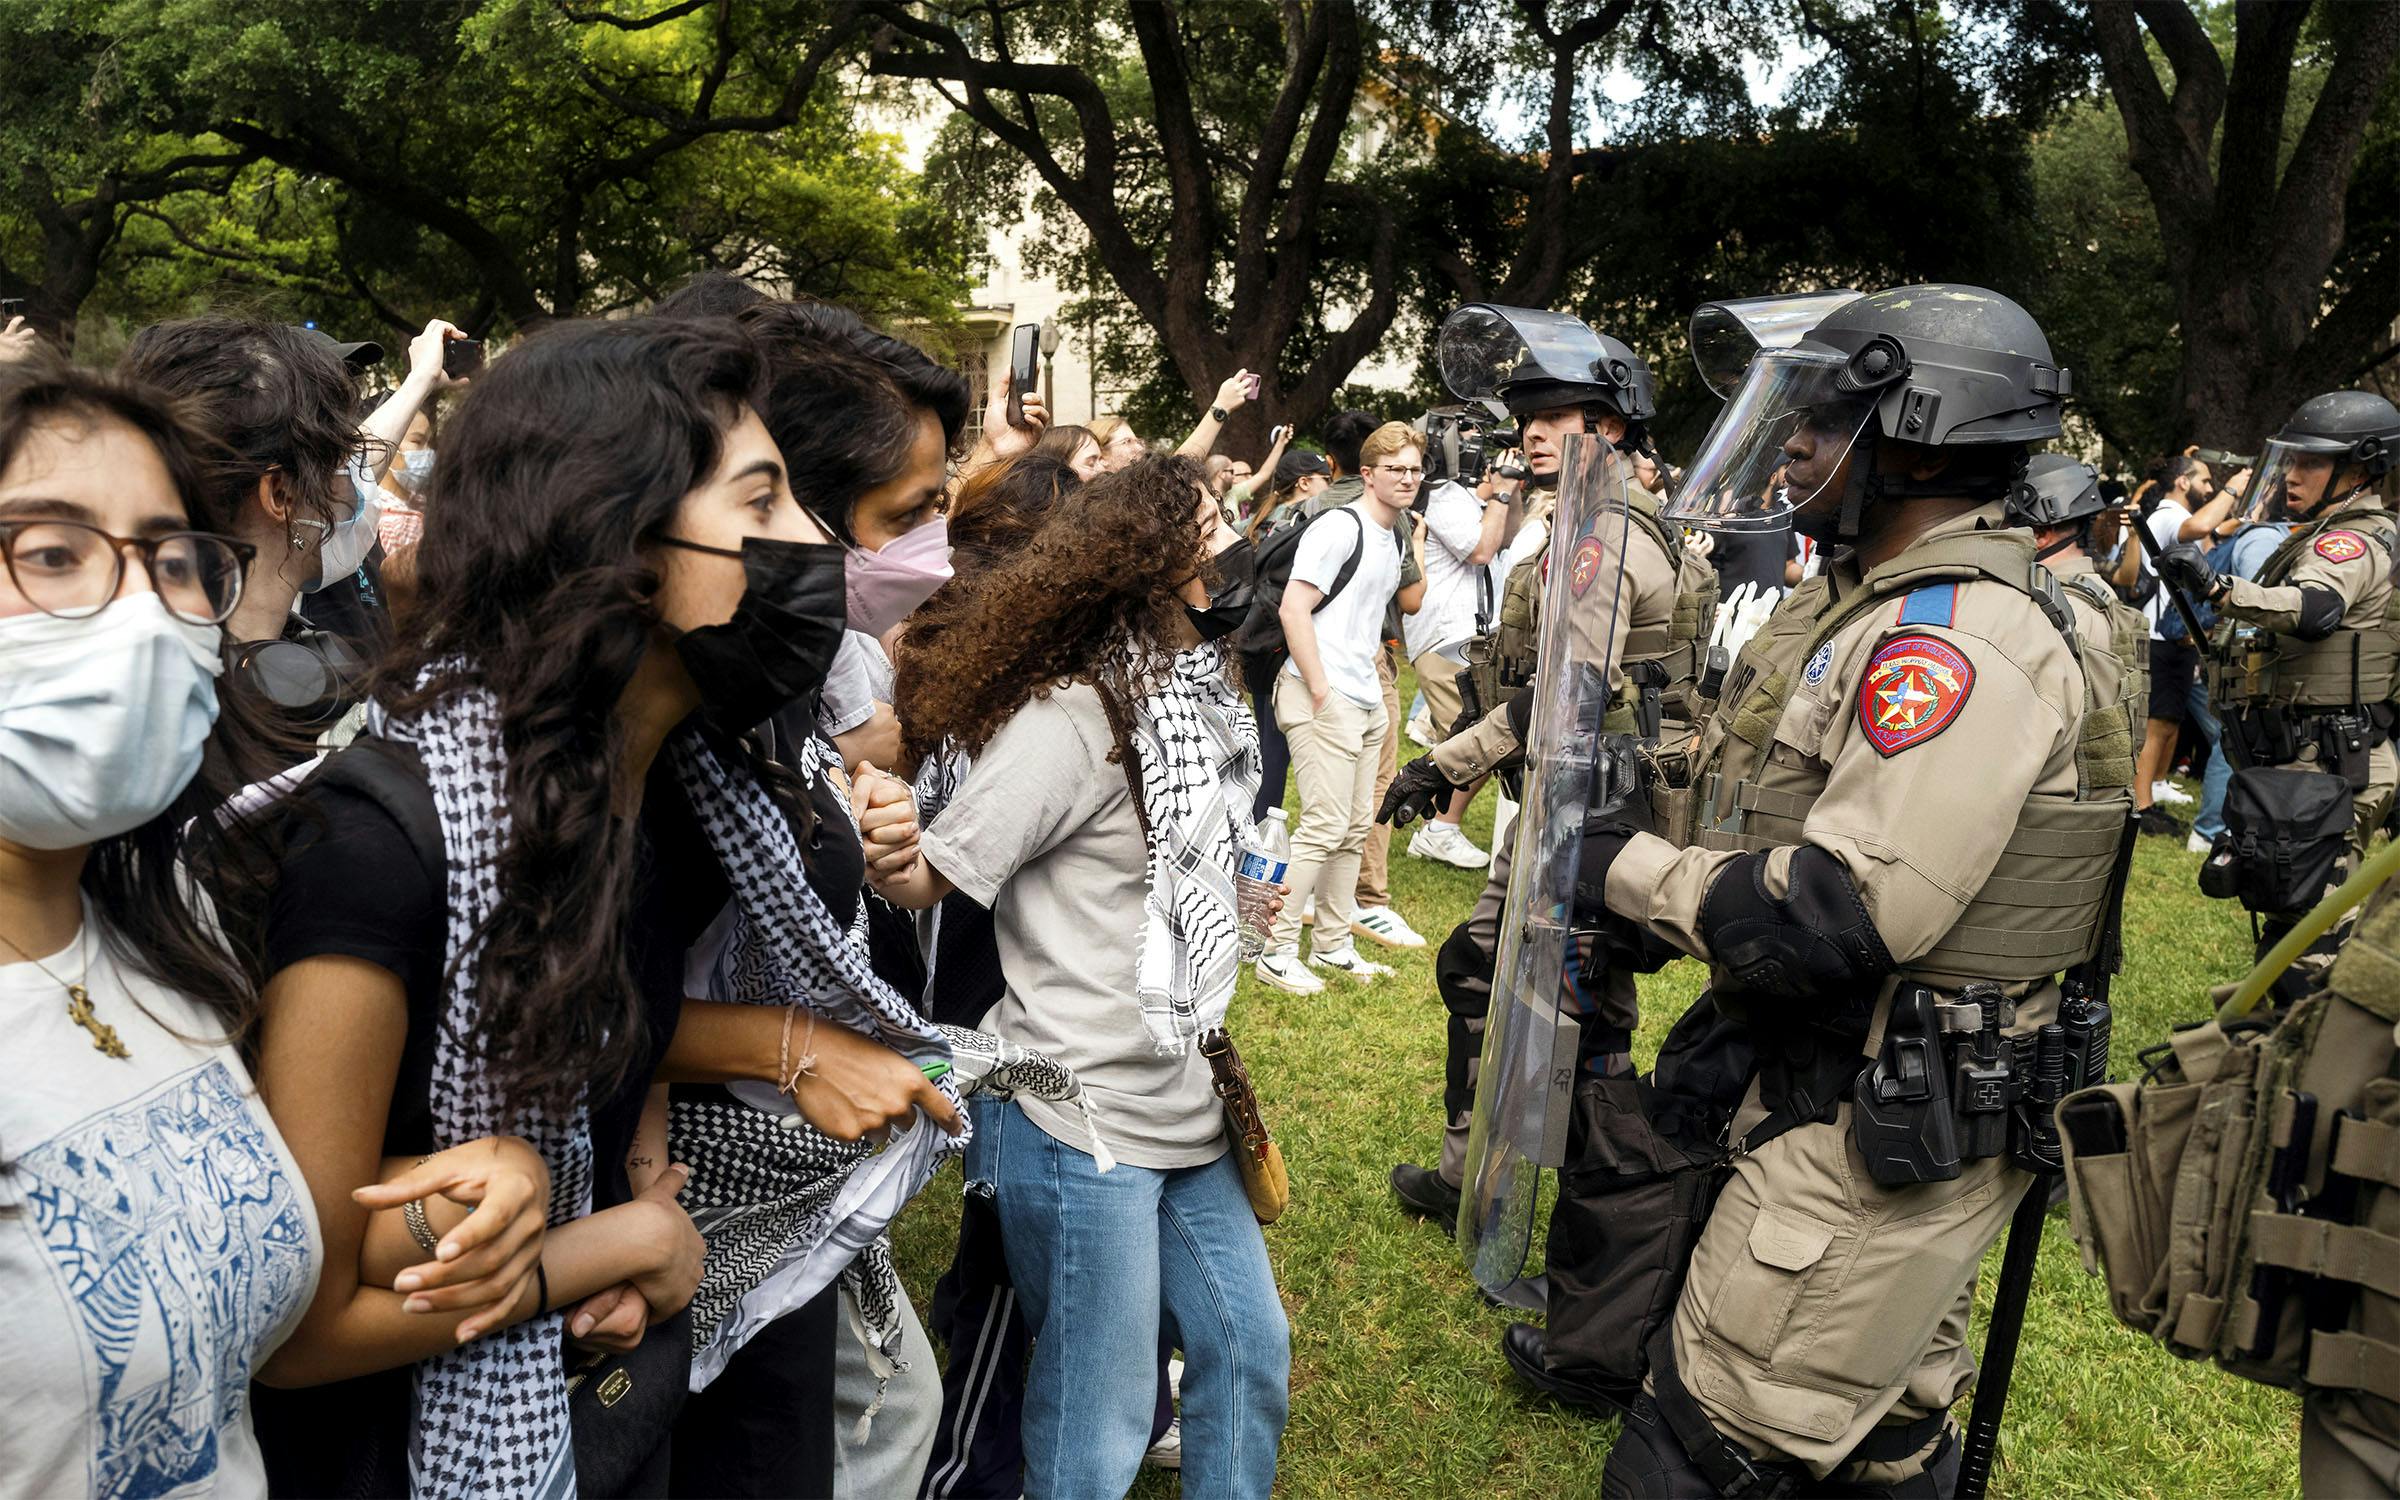 “This Would Have Been a Peaceful Gathering”: Behind the UT Protest [Video]